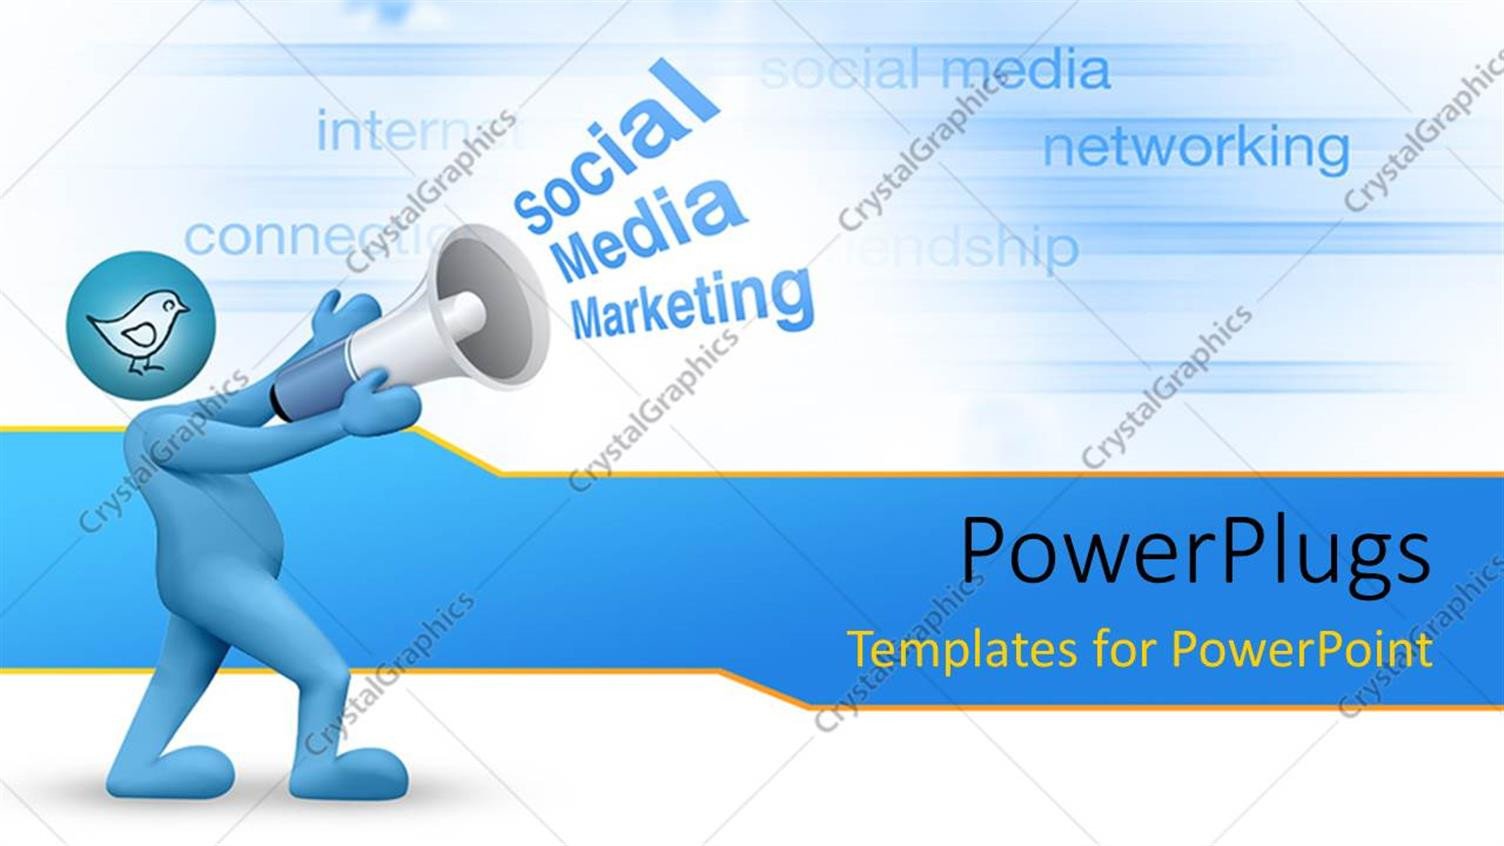 PowerPoint Template Social Media marketing concept with